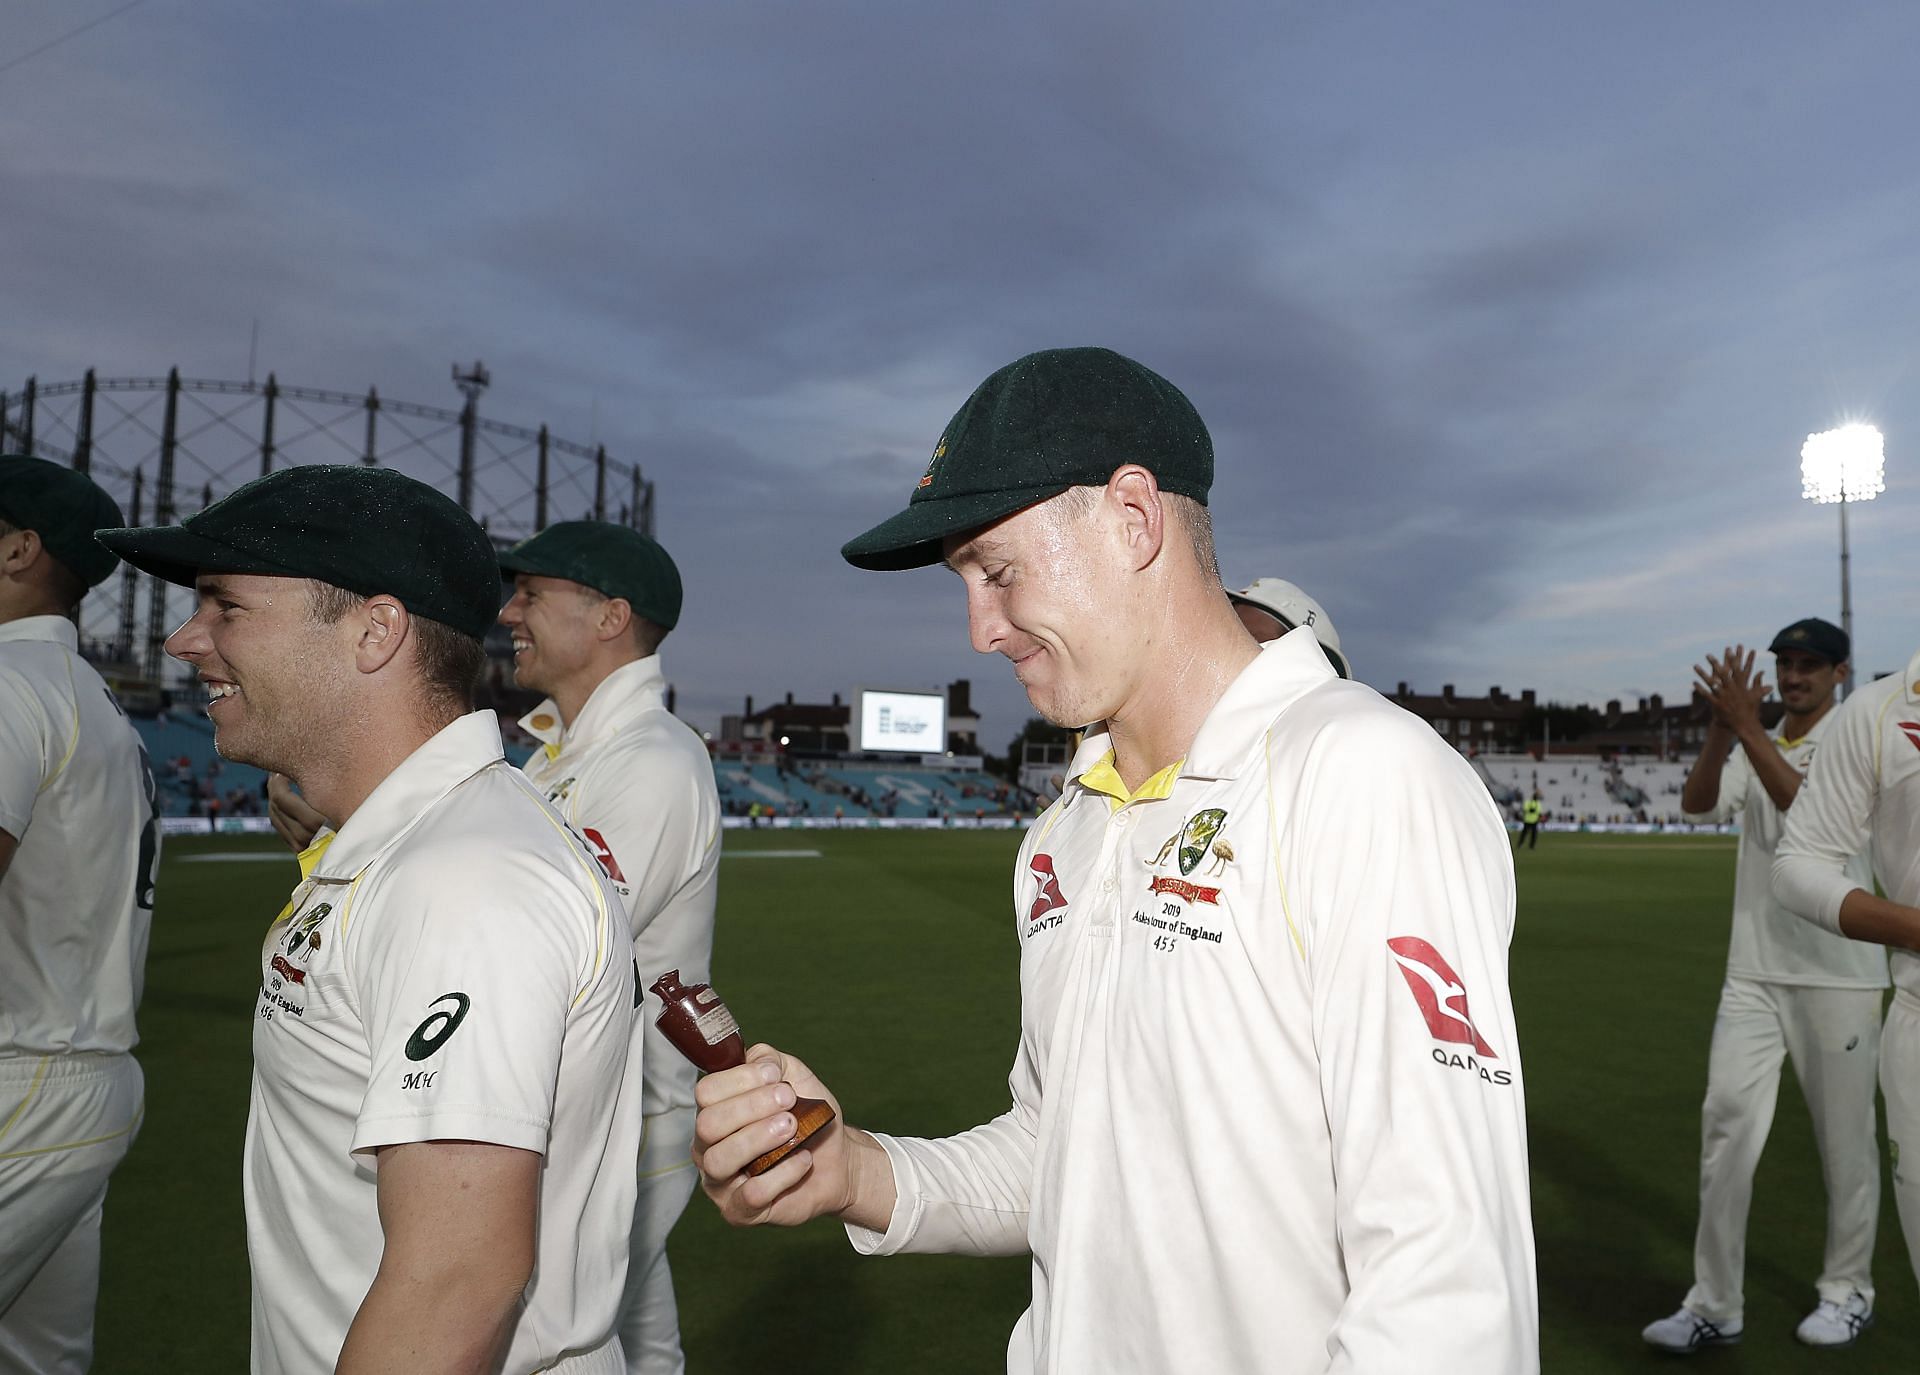 Marnus Labuschagne with the Ashes urn. (Image Credits: Getty)